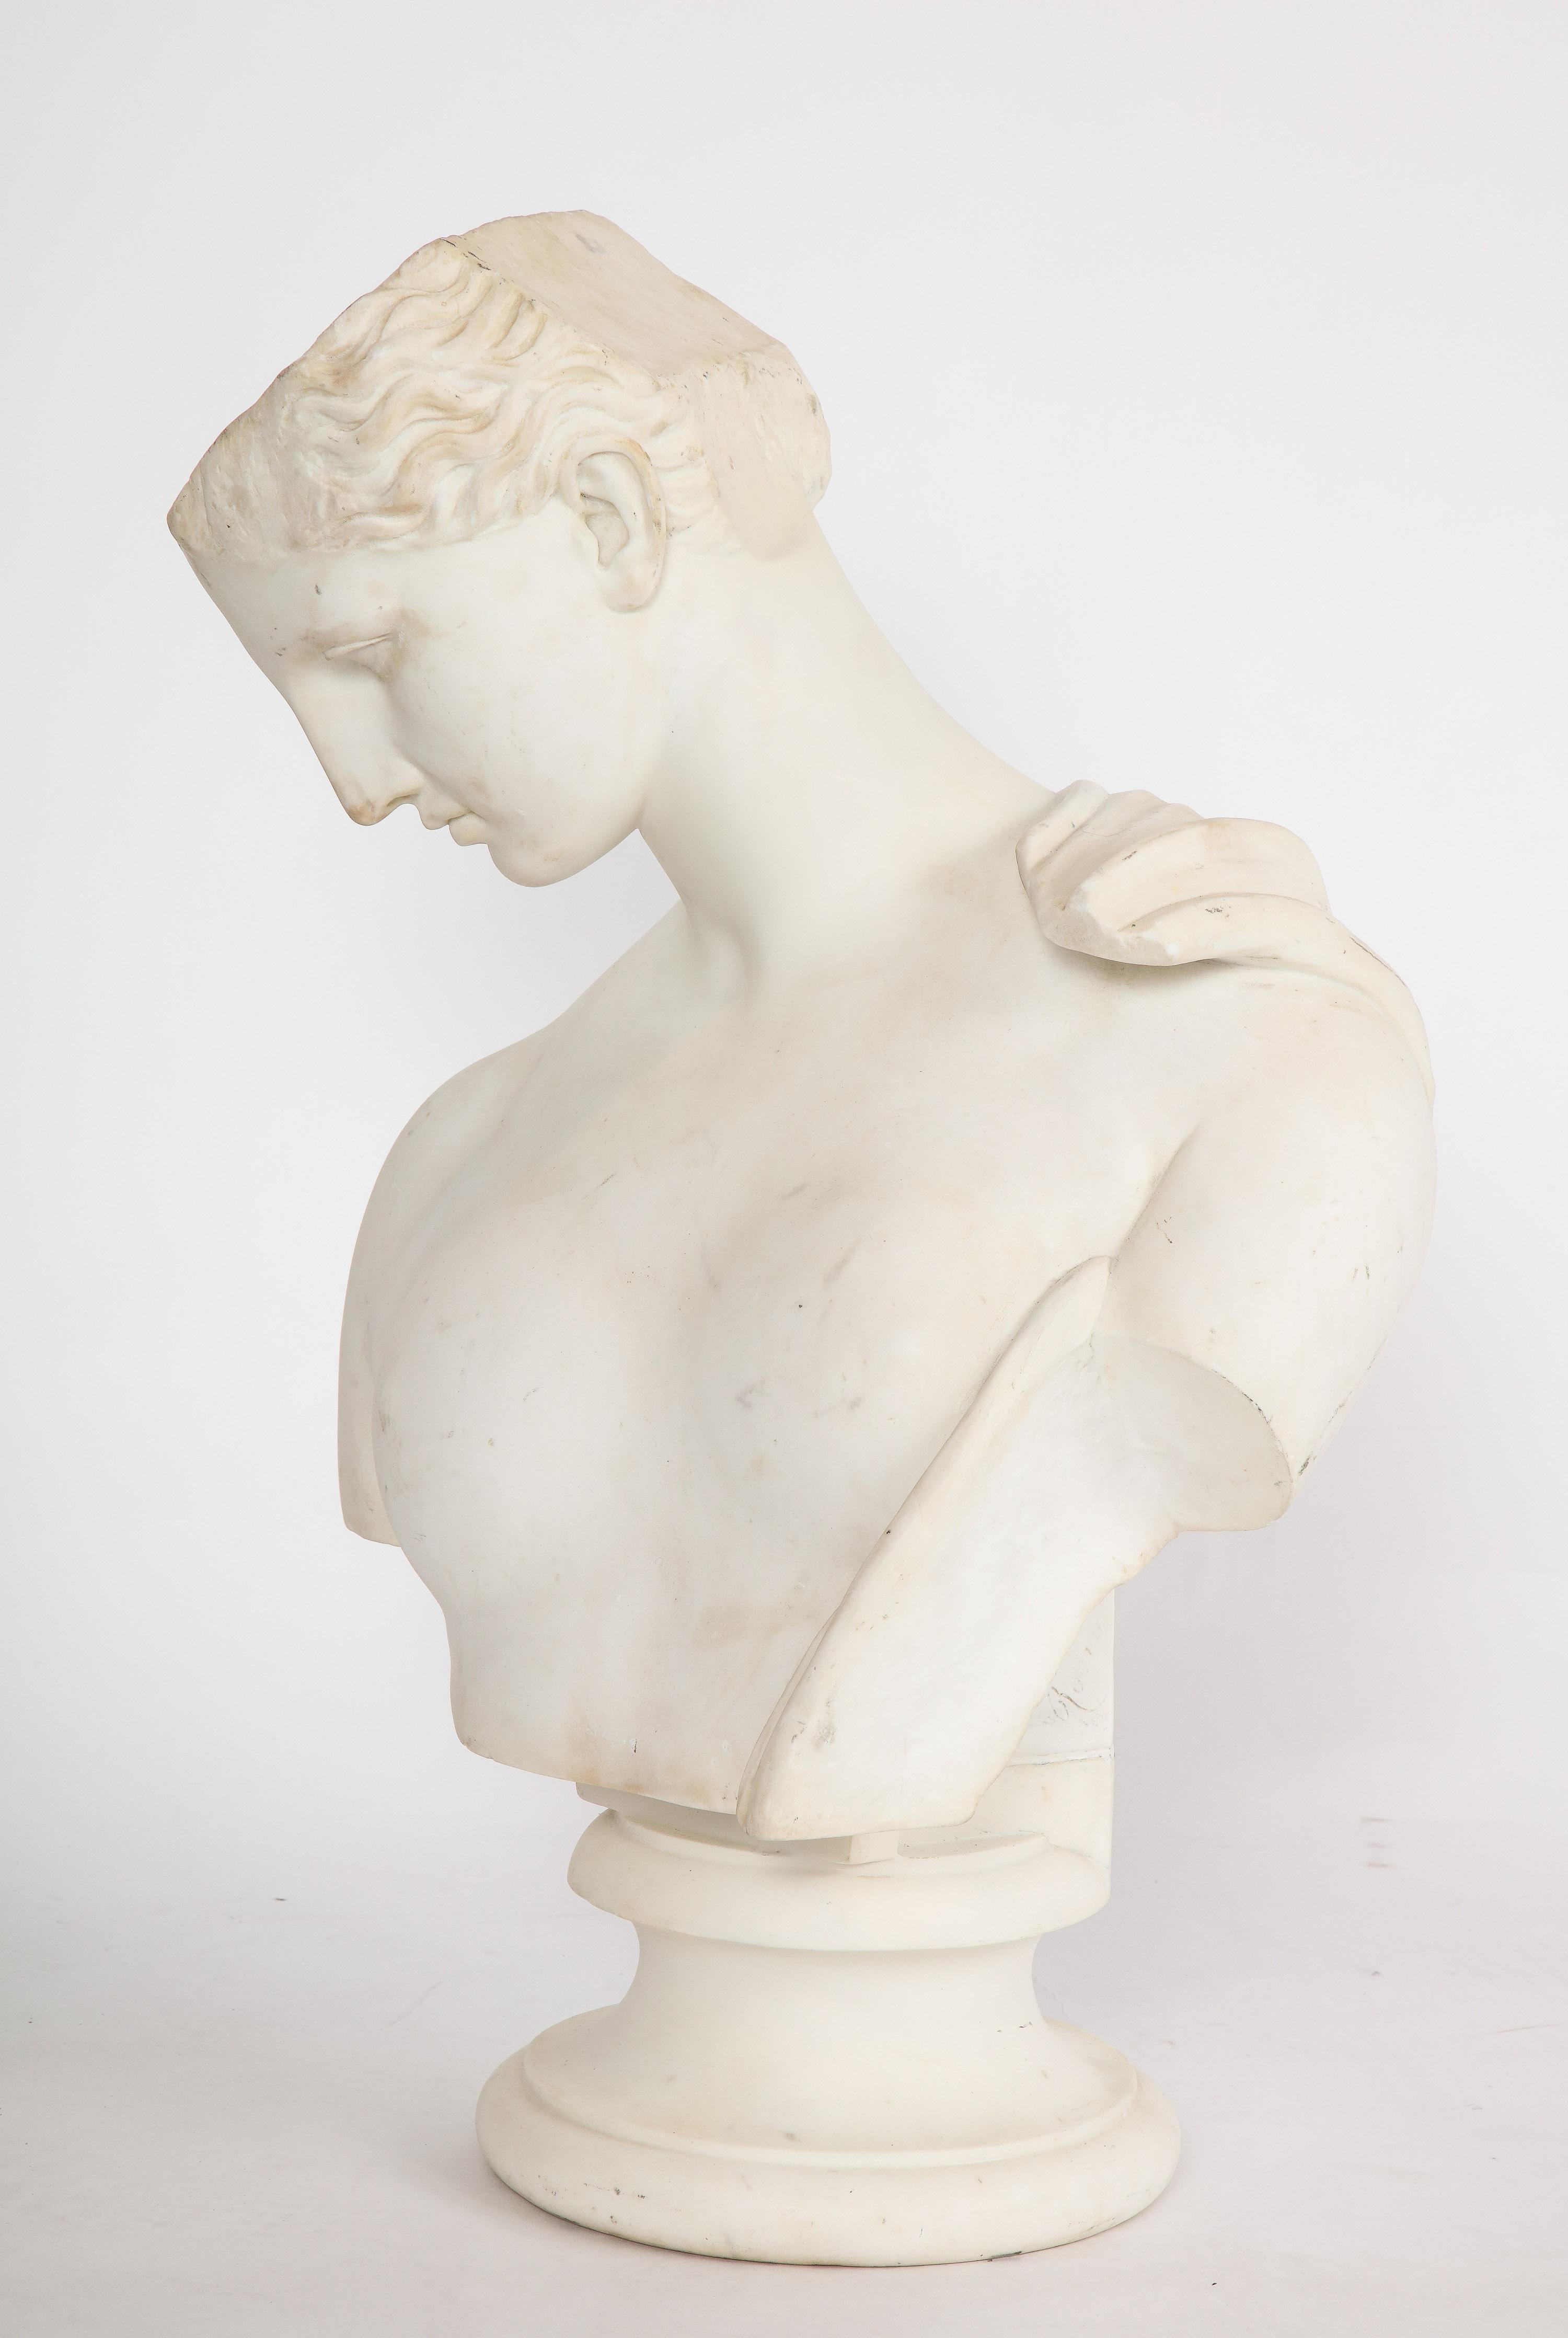 An antique Italian neoclassical marble bust of psyche, by Giuseppe Carnevale, Rome, 19th century.

Very decorative bust of a male with half a head Psyche of Capua.

Signed G. Carnevale, with address in Rome.

Good condition. Normal wear